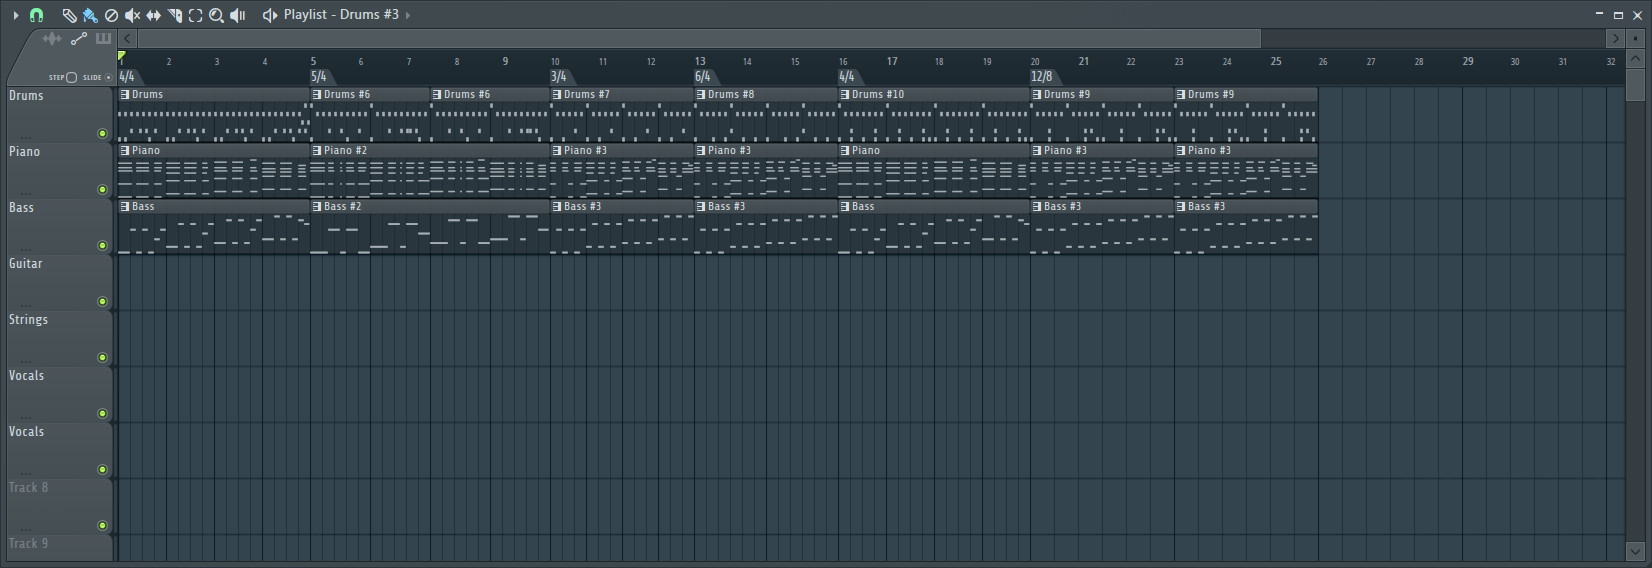 Time Signatures In Fl Studio - Page 5 - Hosts & Applications (Sequencers,  DAWs, Audio Editors, etc.) Forum - KVR Audio